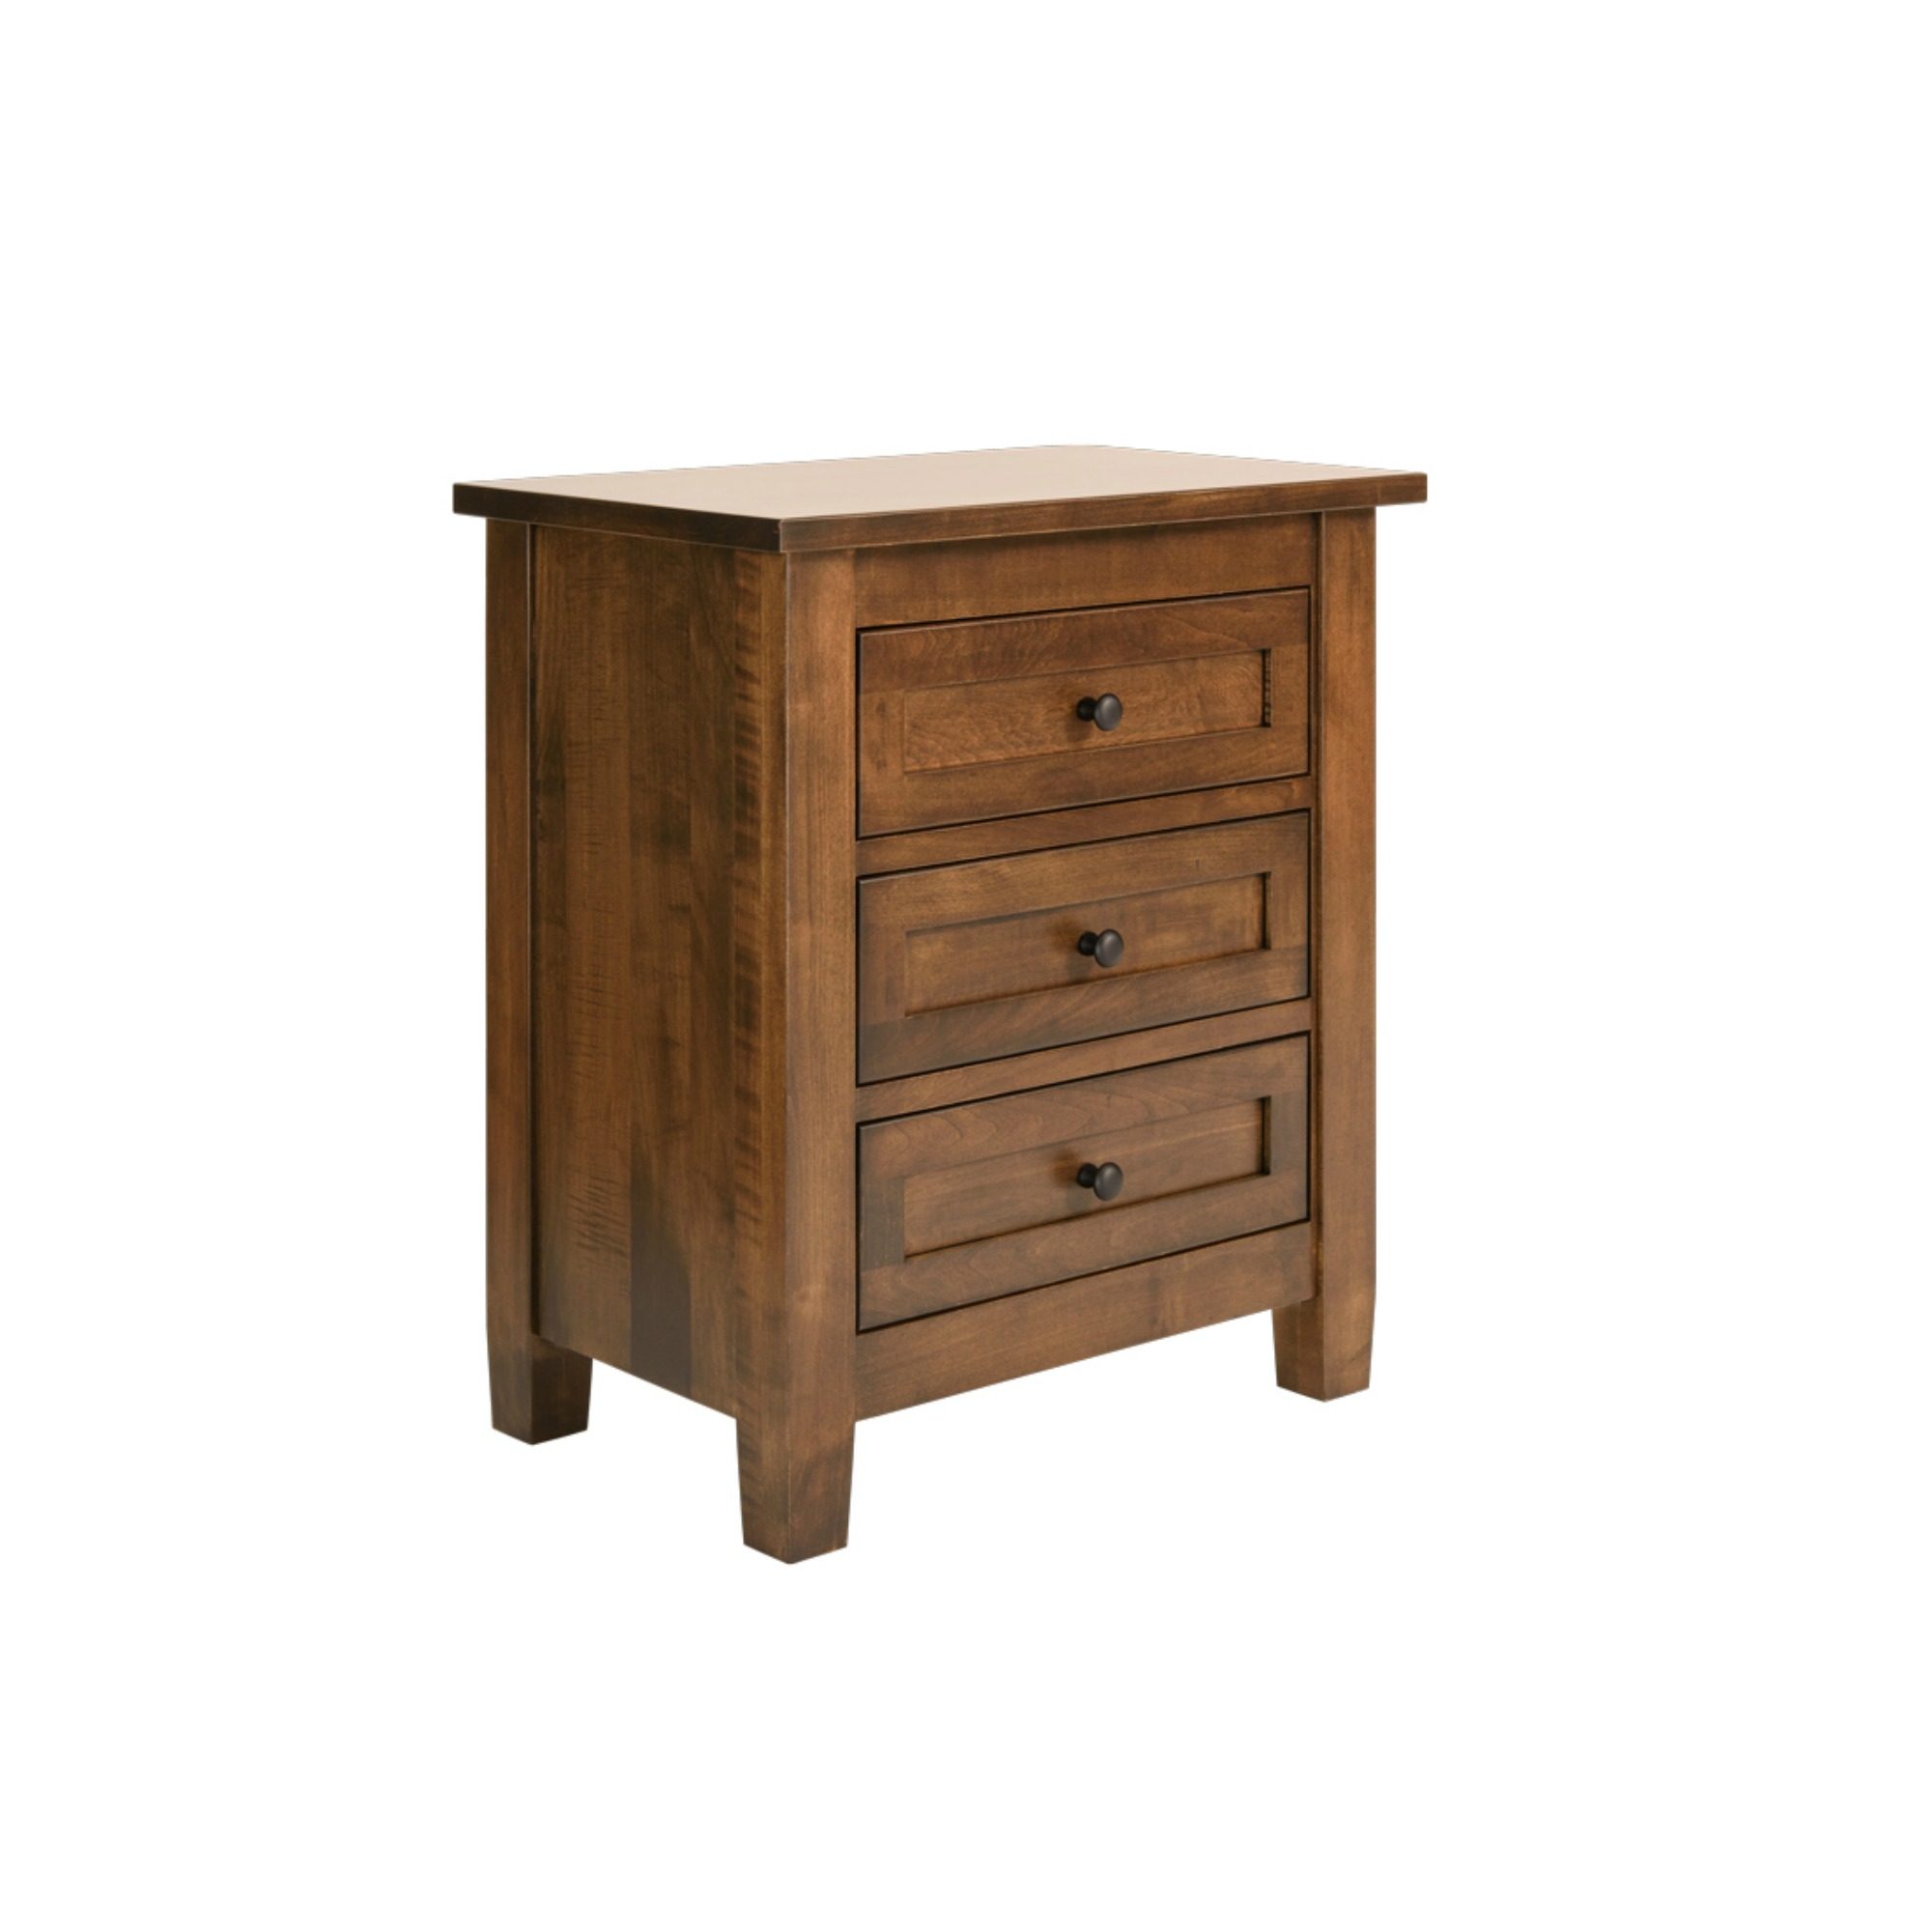 adrian-3-drawer-nightstand-amish-fusion-designs